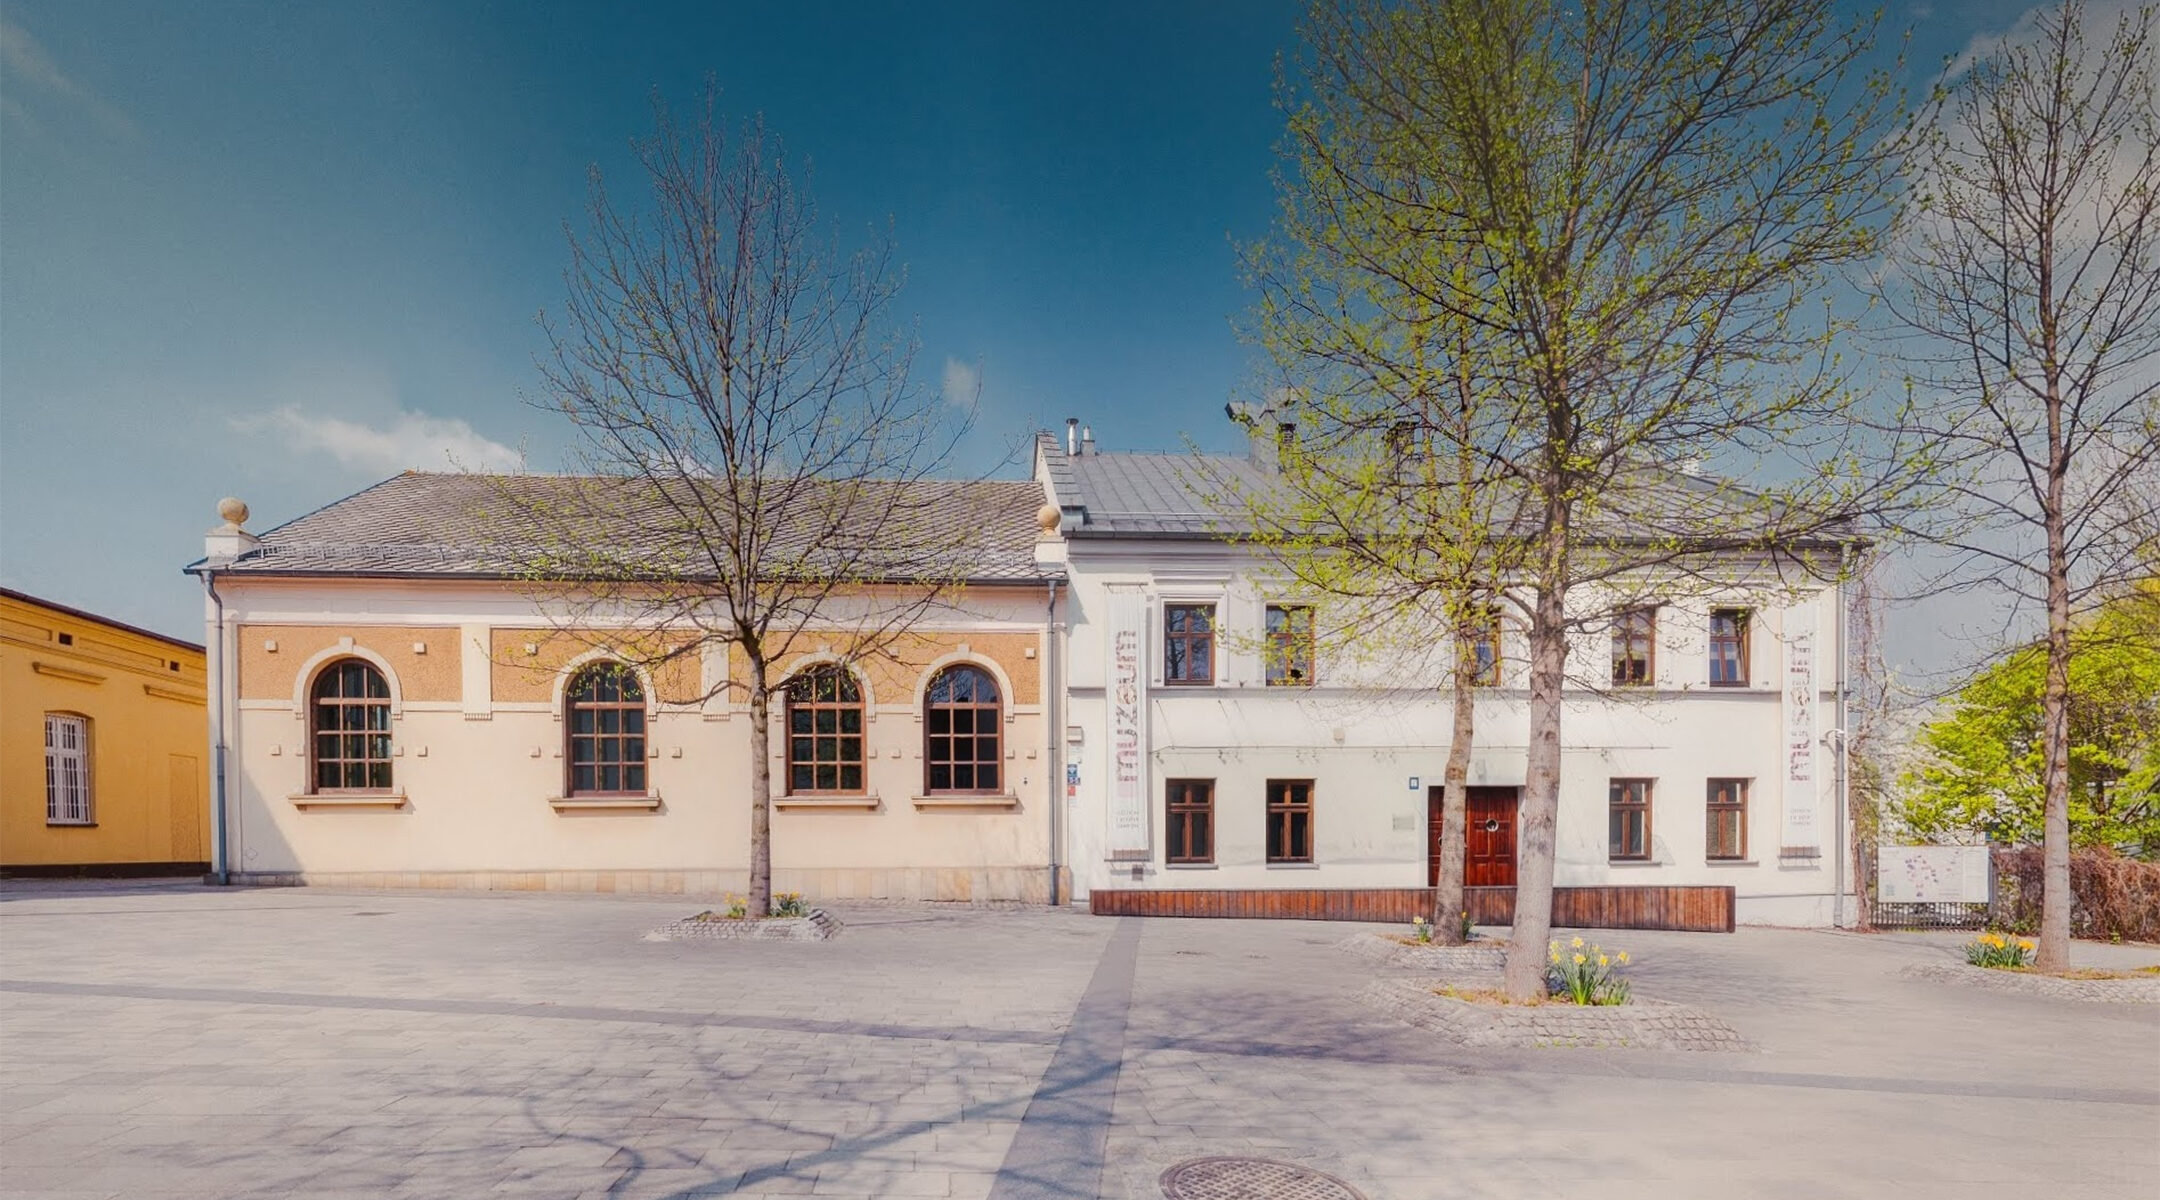 The Auschwitz Jewish Center in Oswiecm, Poland receives about 1% of the 2.3 million visitors who come to the former death camp each year. (Courtesy of the Auschwitz Jewish Center)